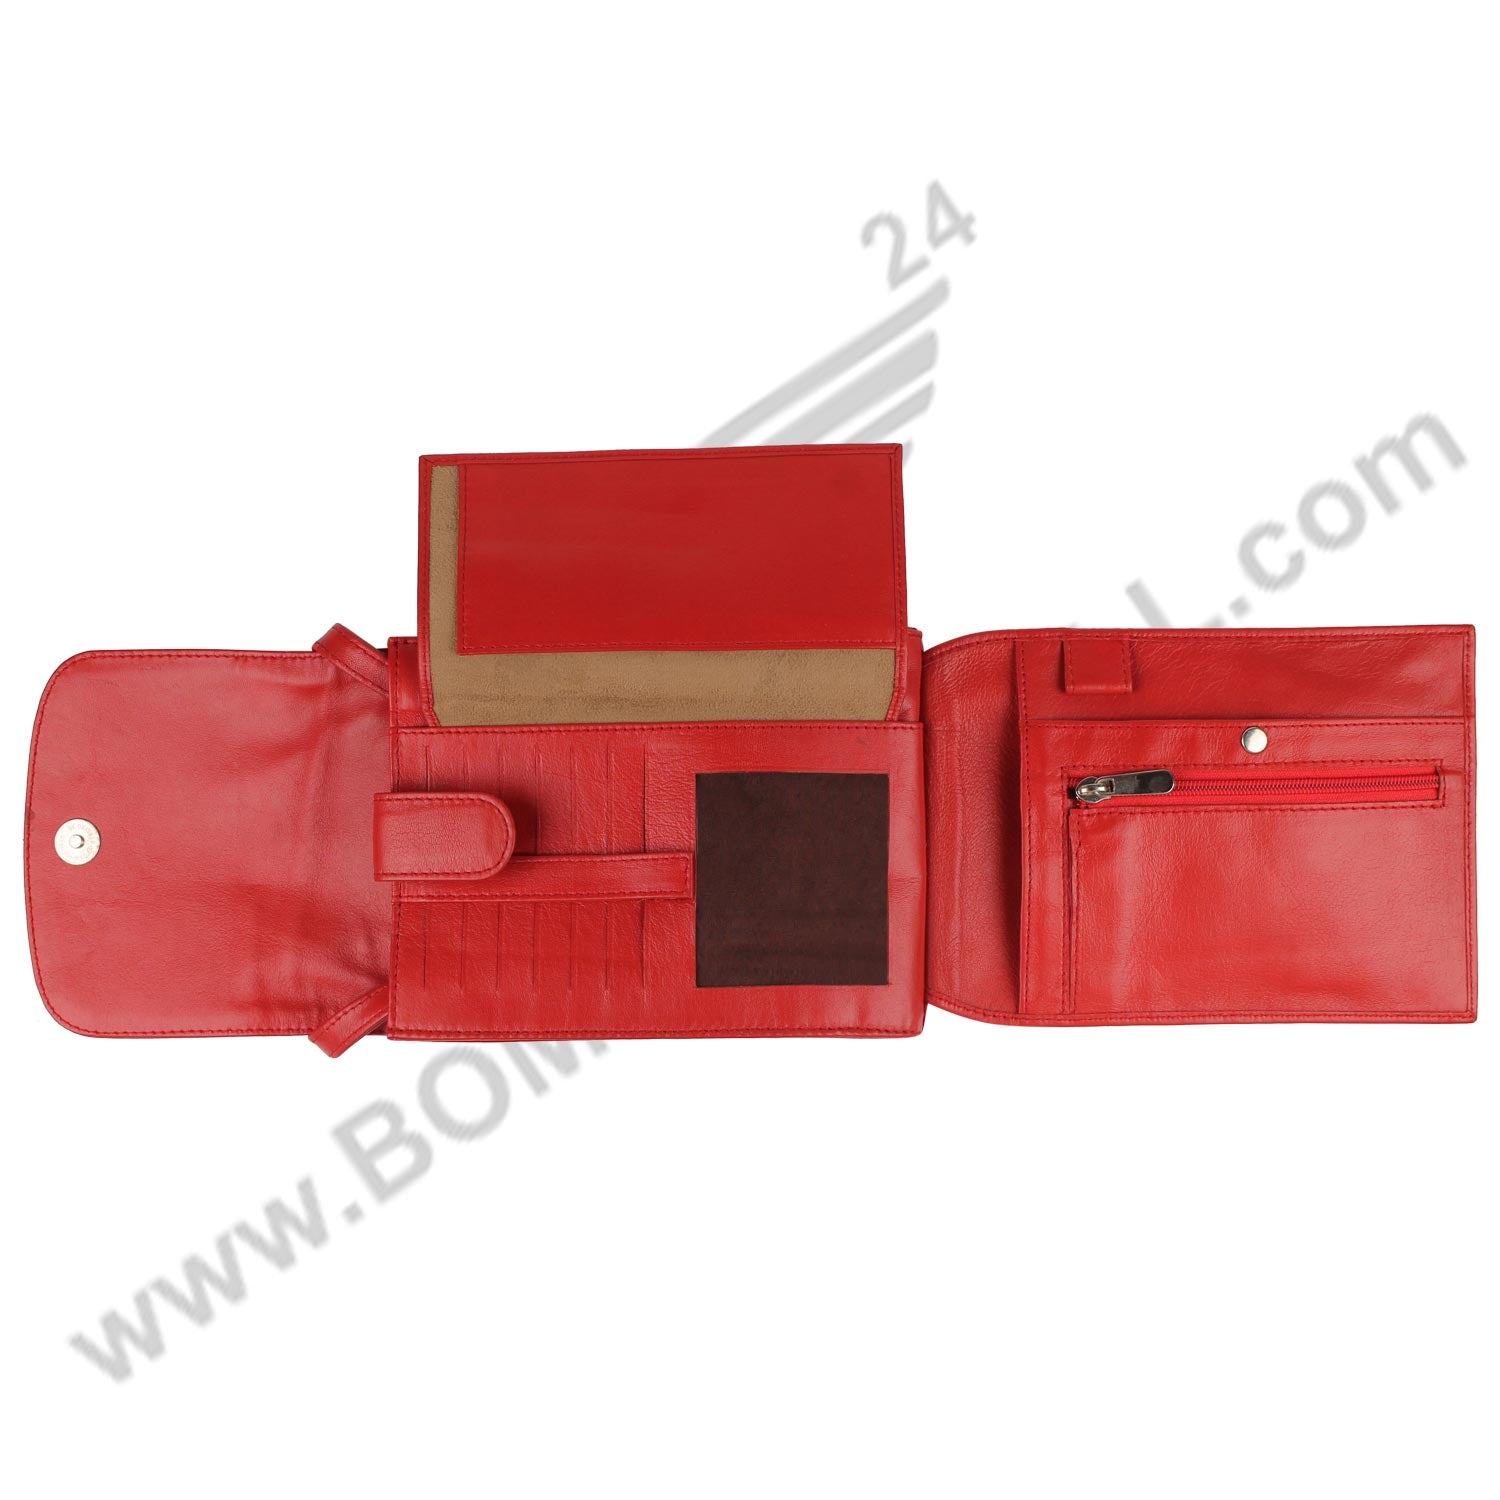 Image depicting all the pockets of MULTI POCKET CROSS BODY HAND BAG